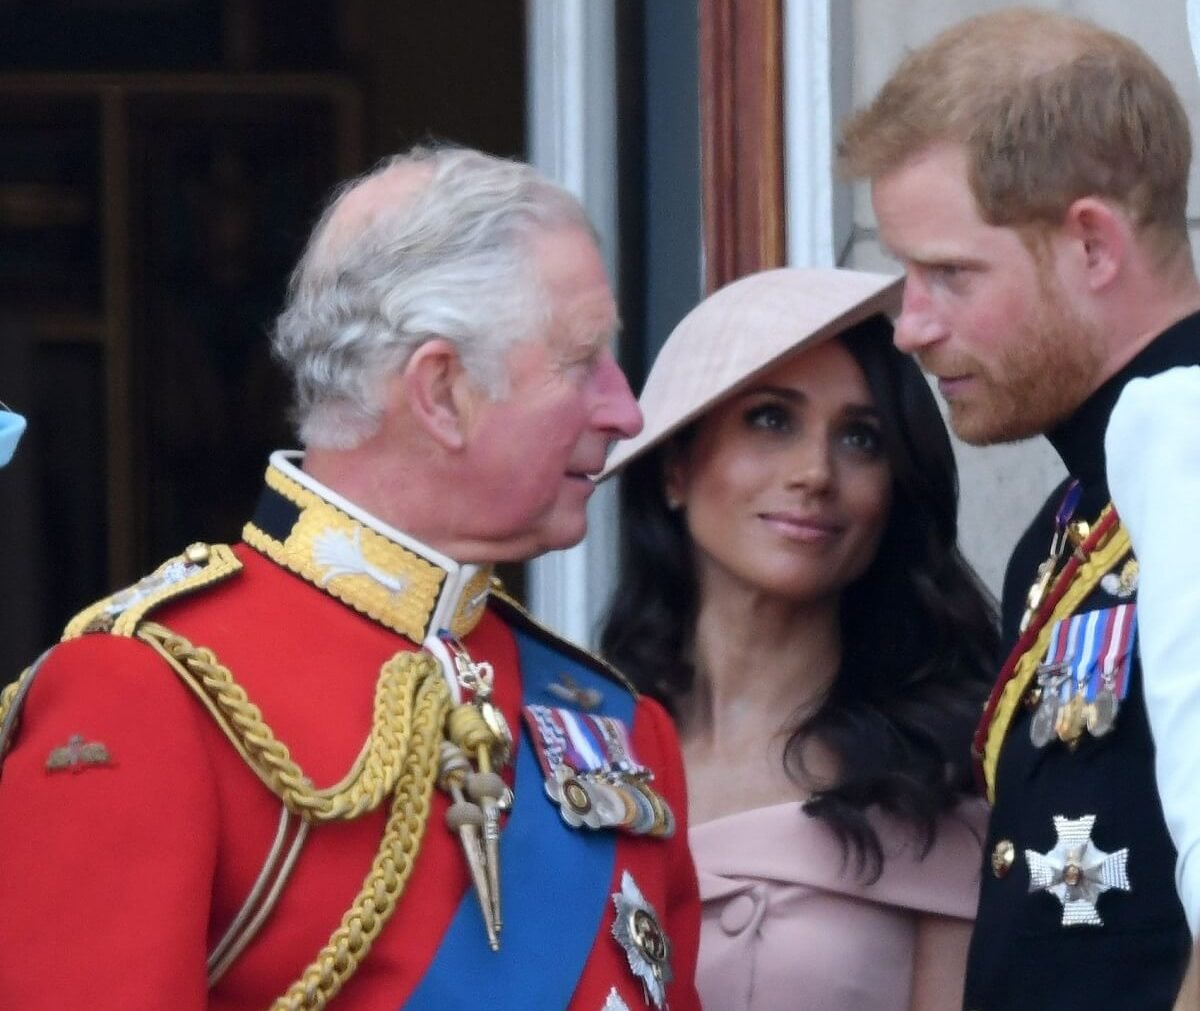 King Charles III, who has been warned not to stoop to Prince Harry and Meghan Markle's level, standing on the balcony of Buckingham Palace during Trooping The Colour 2018